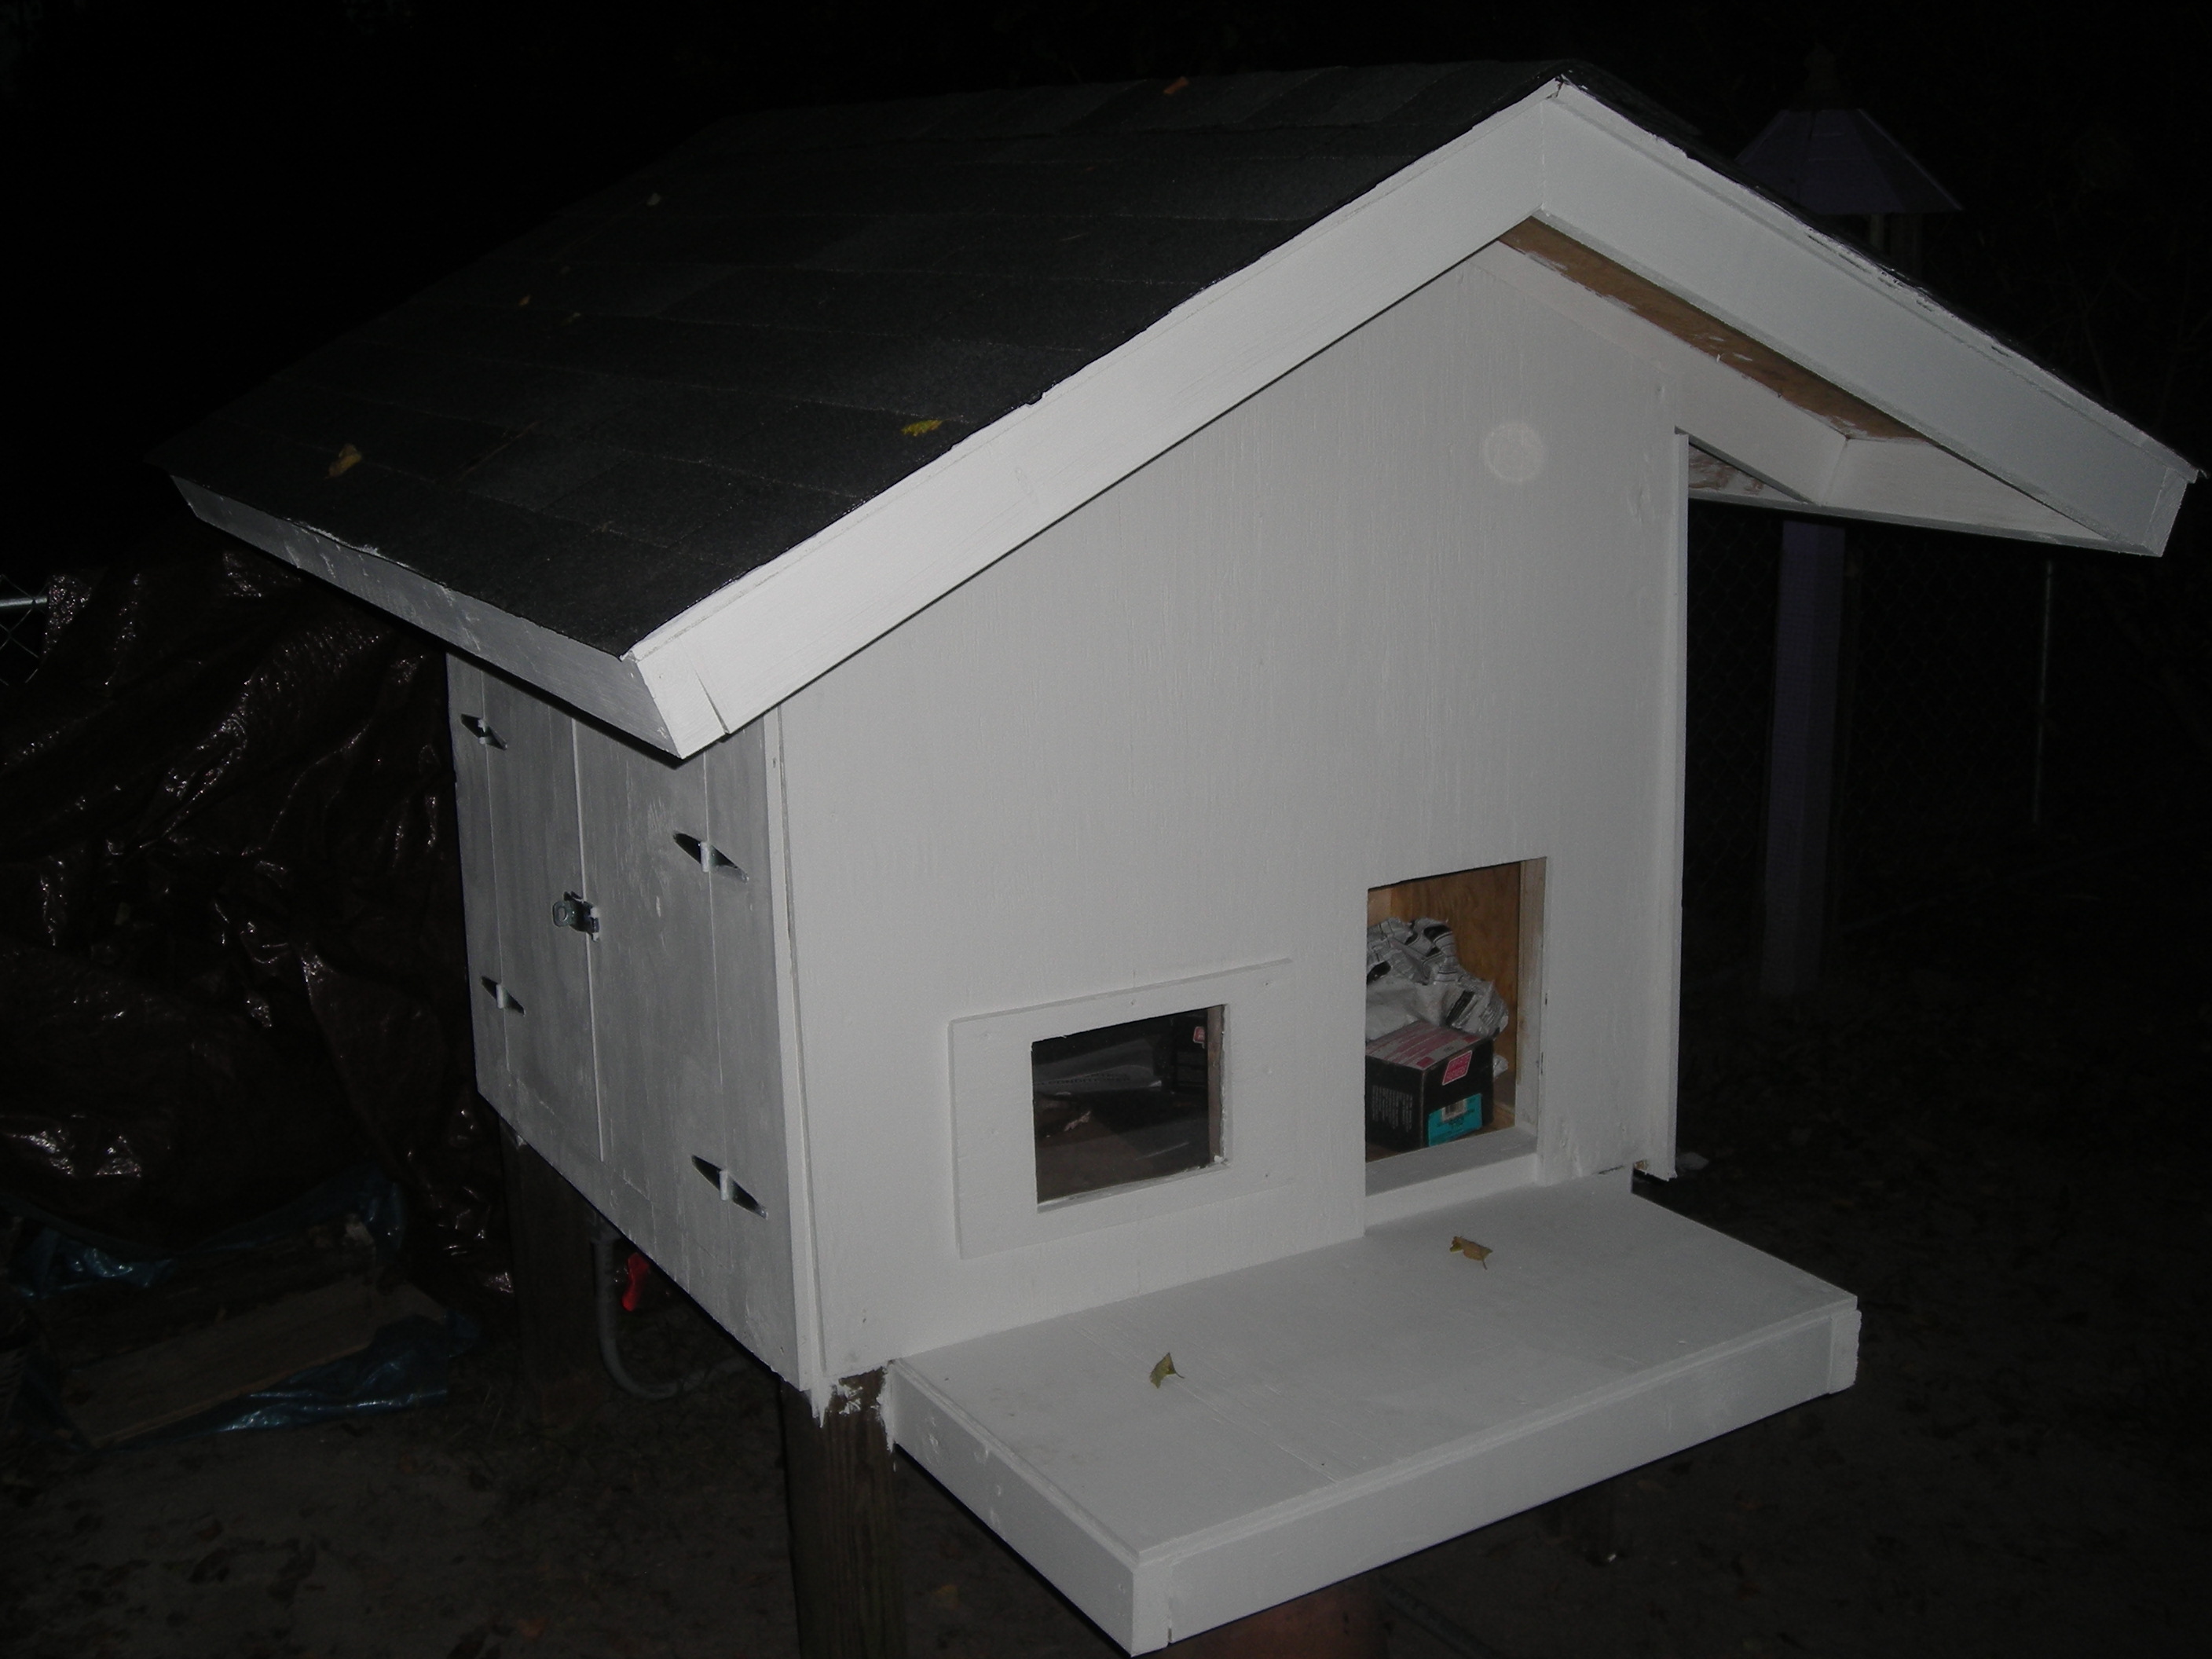 How to build a dog house w/ air conditioning